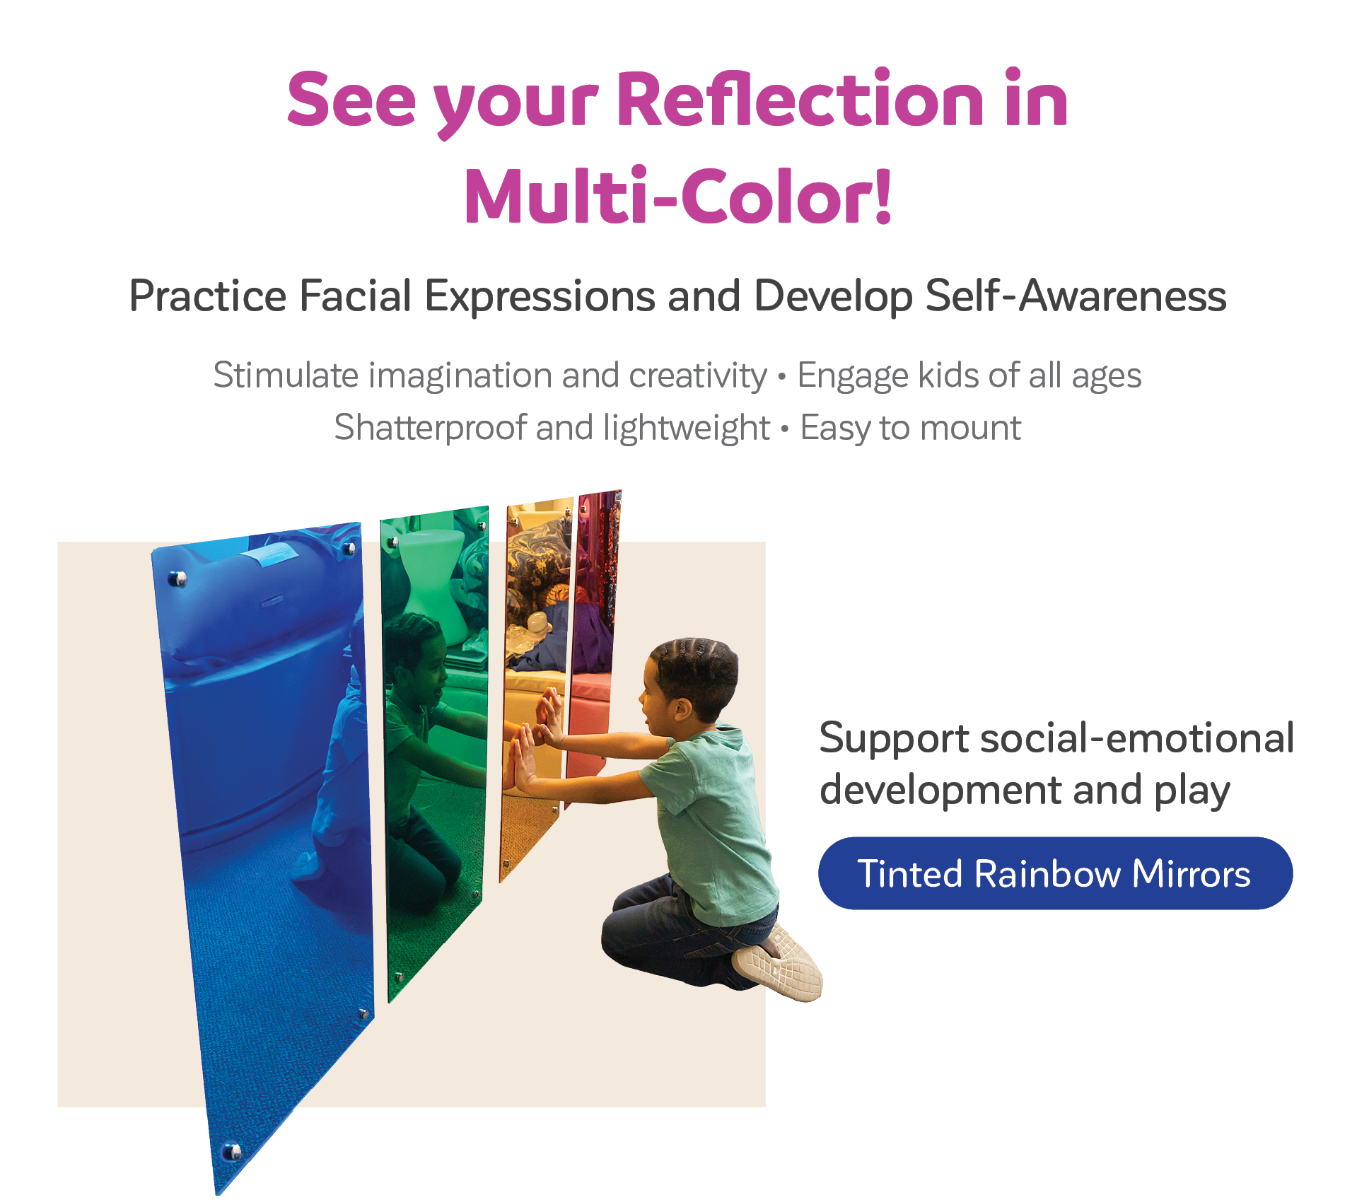 See your Reflection in Multi-Color! Practice Facial Expressions and Develop Self-Awareness! Stimulate imagination and creativity, Engage kids of all ages, Shatterproof and lightweight, Easy to mount.